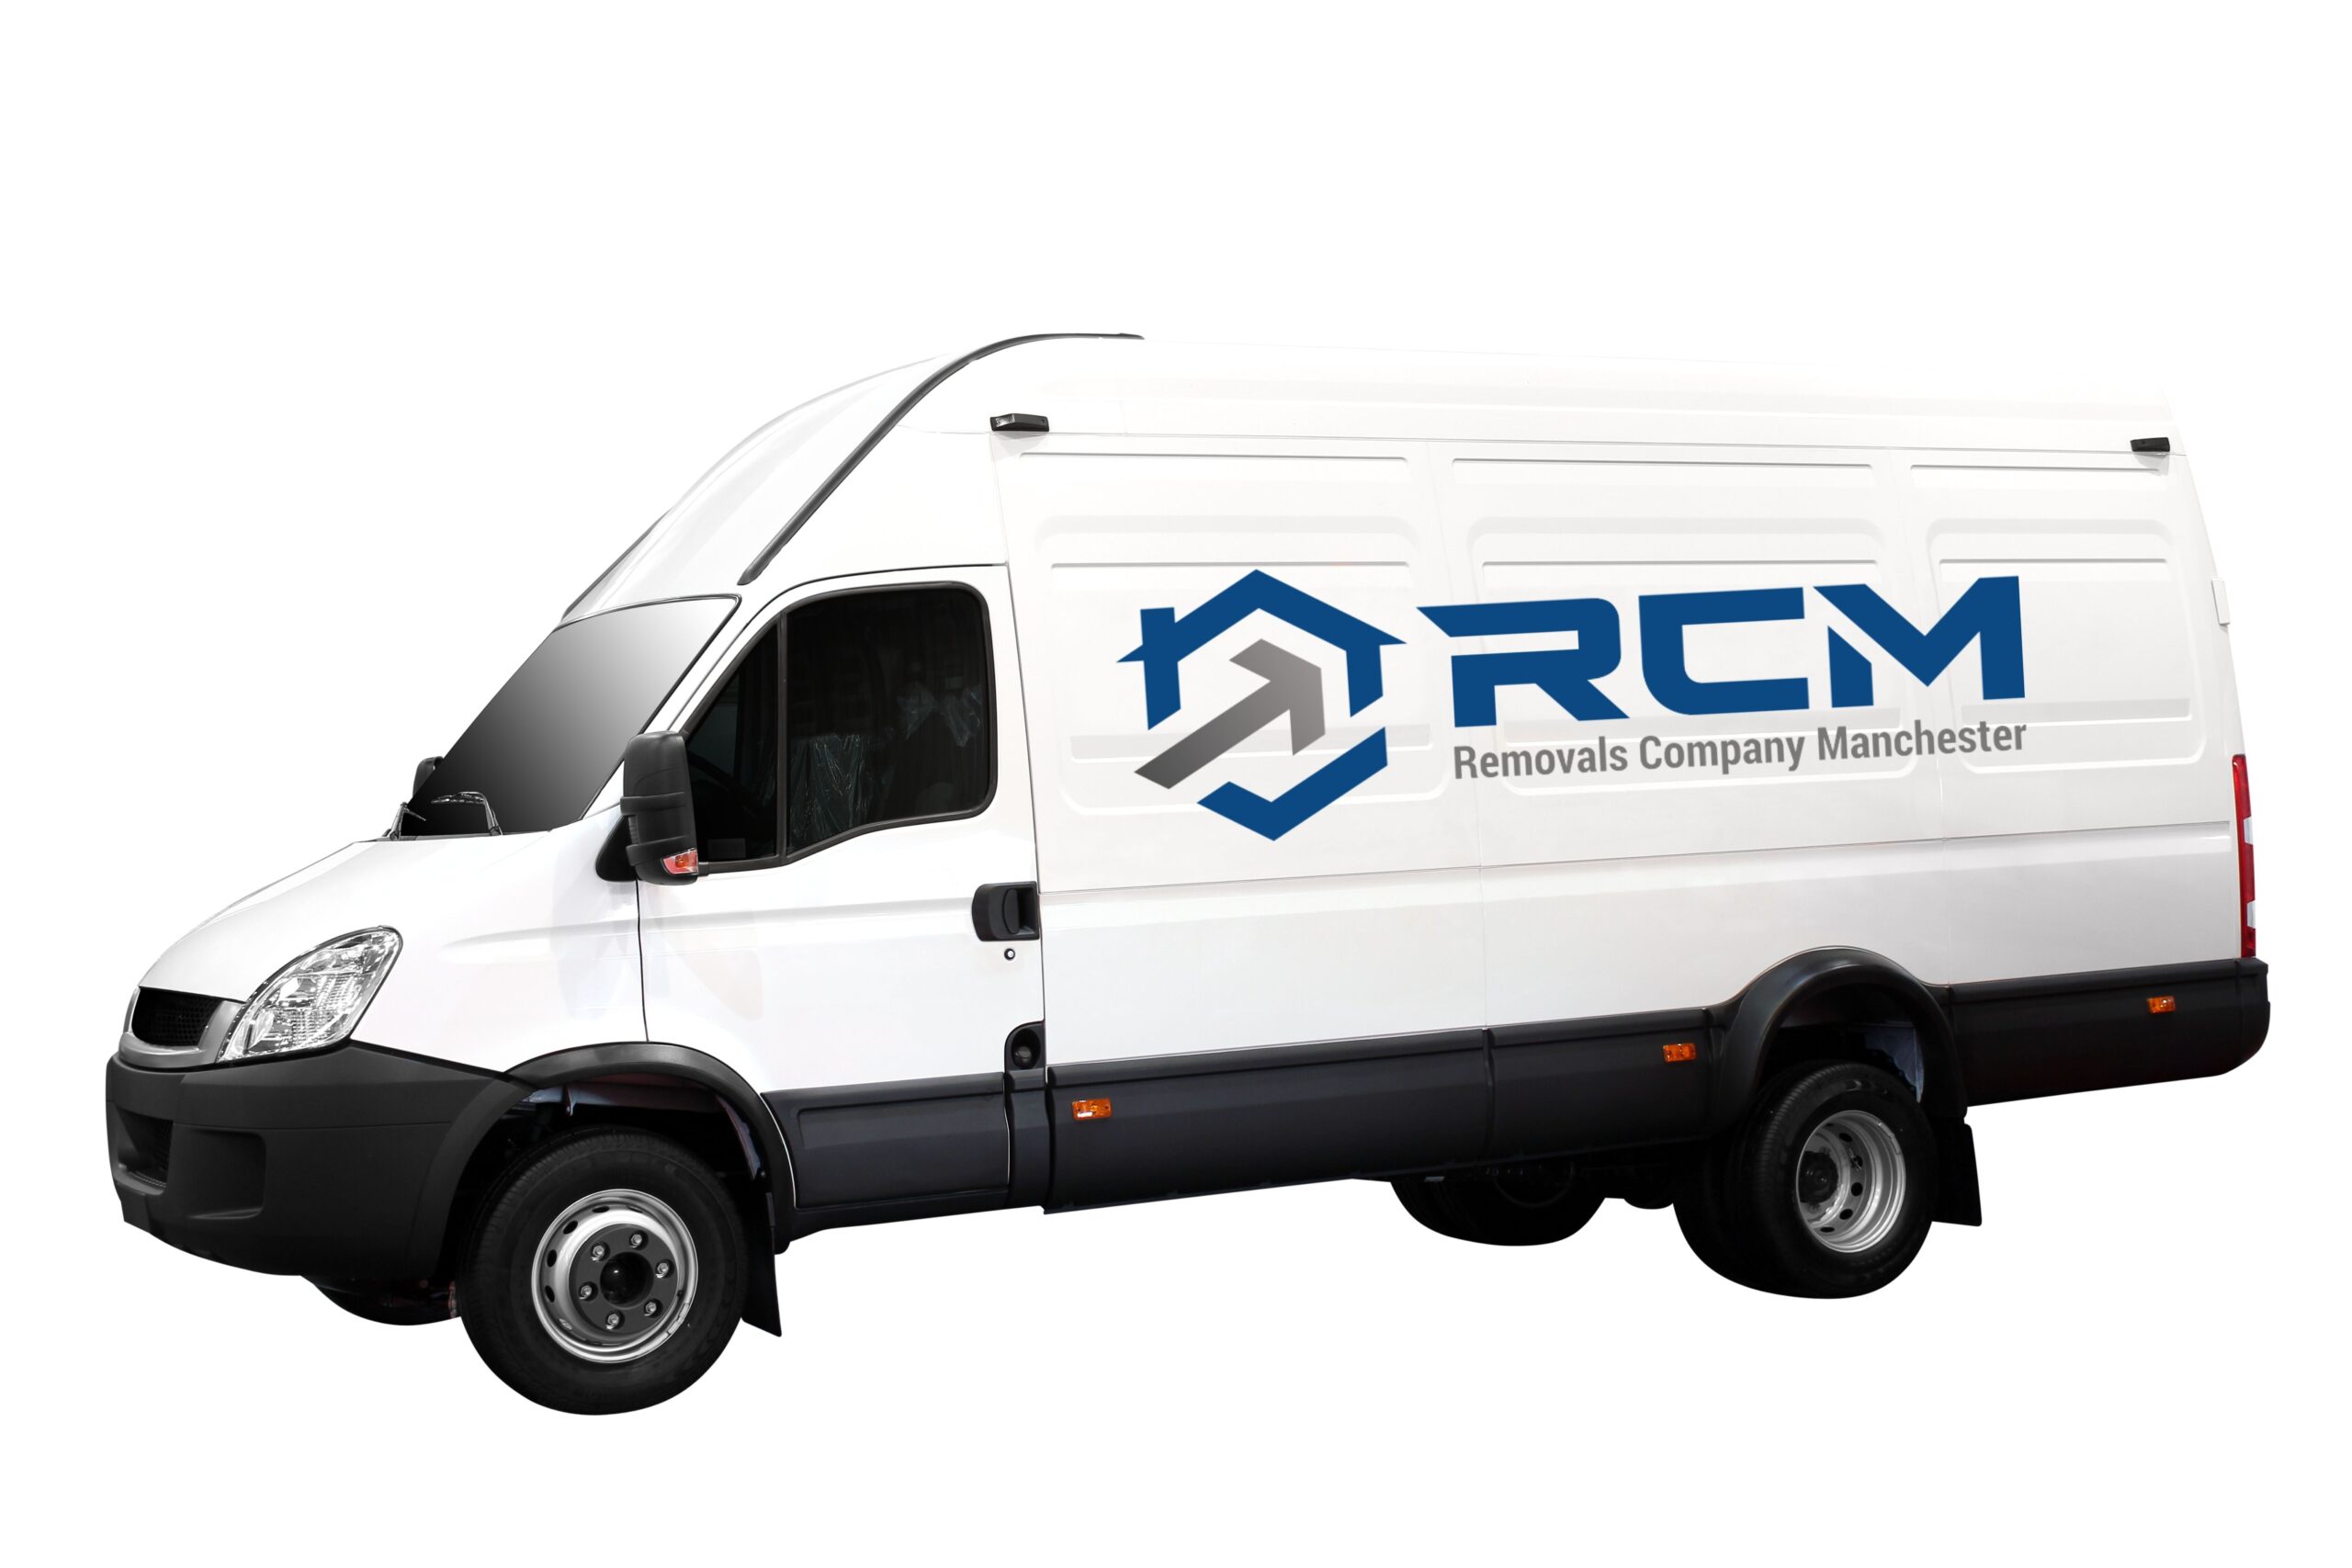 Removal Company Manchester Van